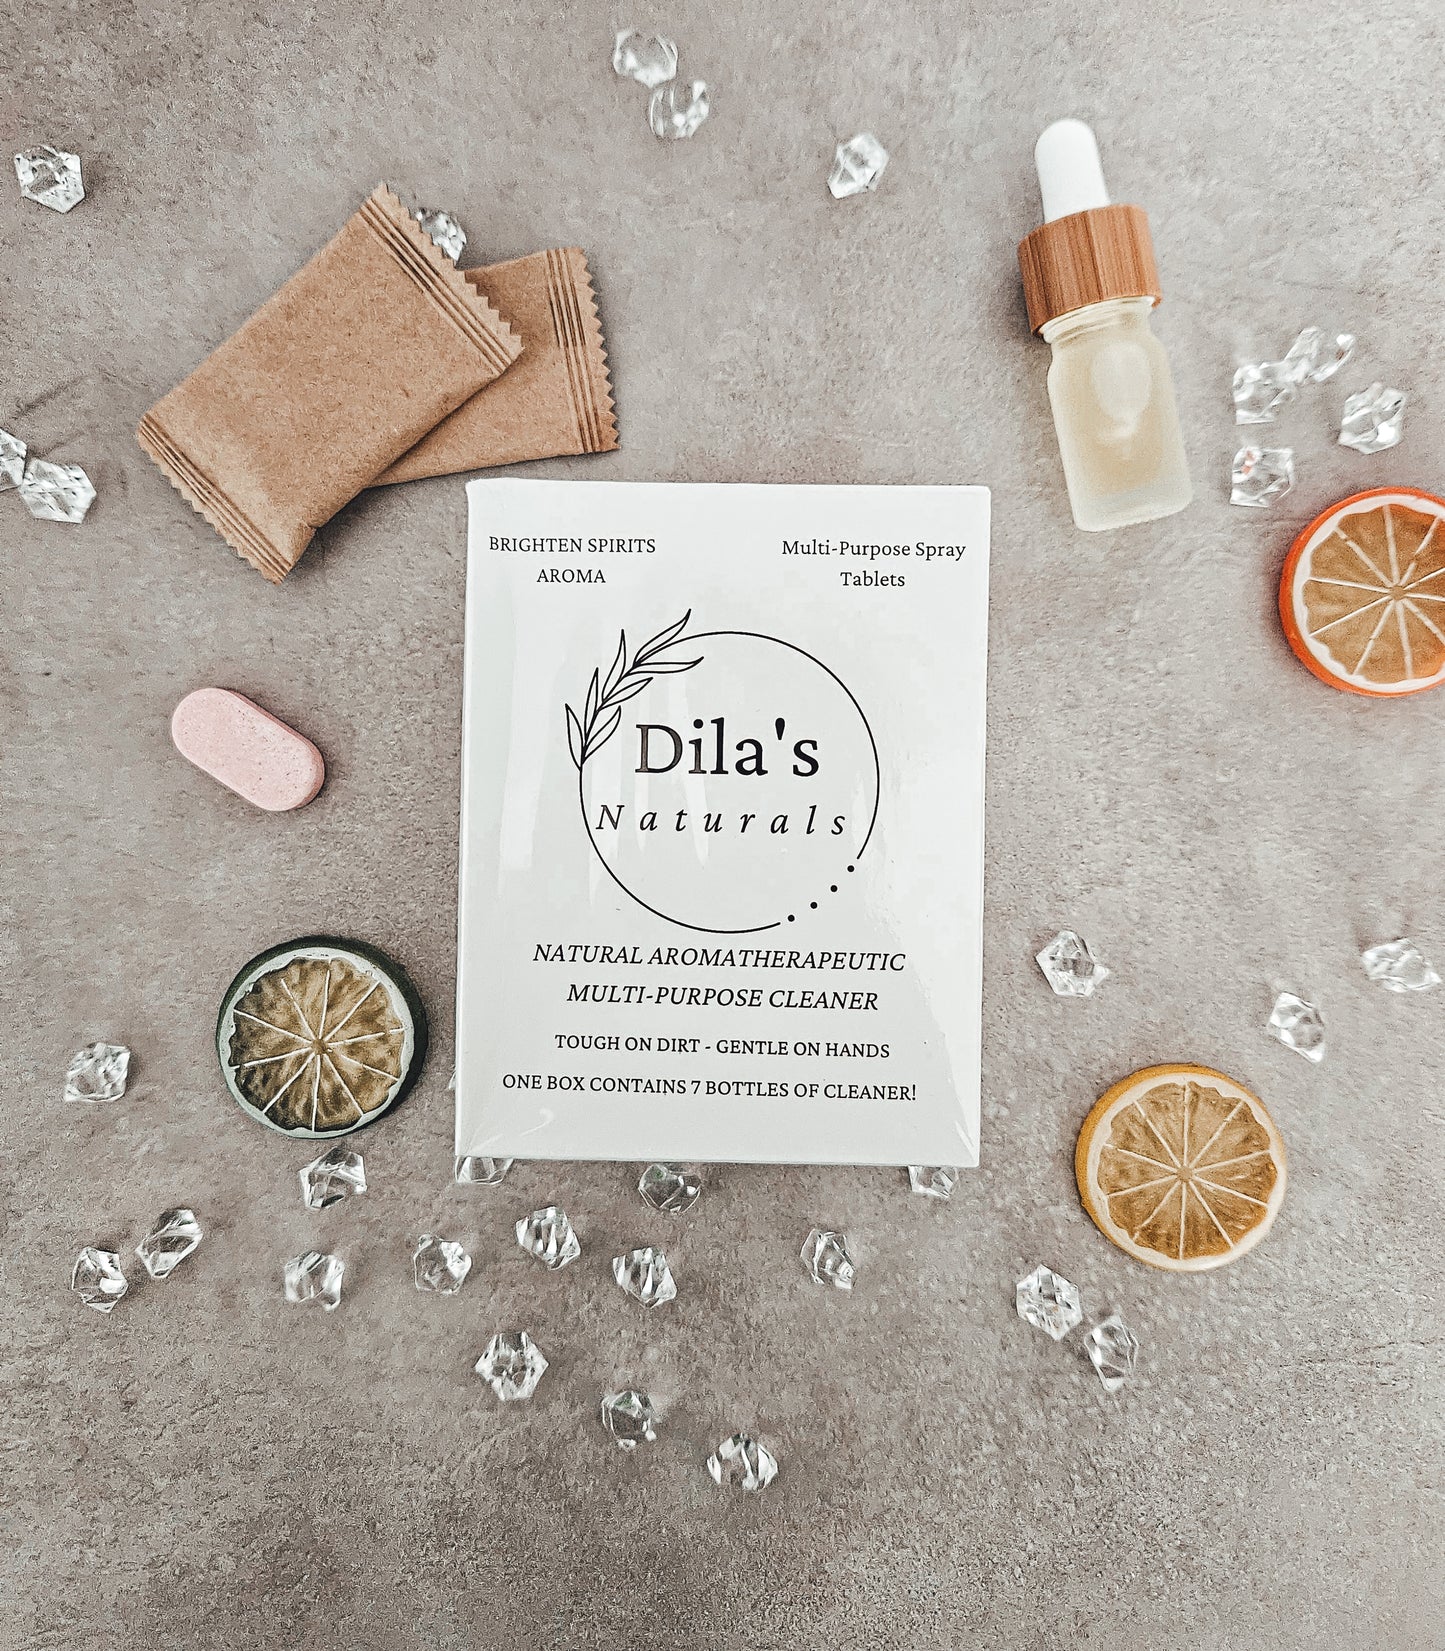 7 Full Bottles worth of Dilas Naturals Eco Friendly All Vegan Multi Purpose Cleaner Tablet  - CitGamot Essential Oil - AND FREE GIFT Fish Scale Rag - DILA'S NATURALS